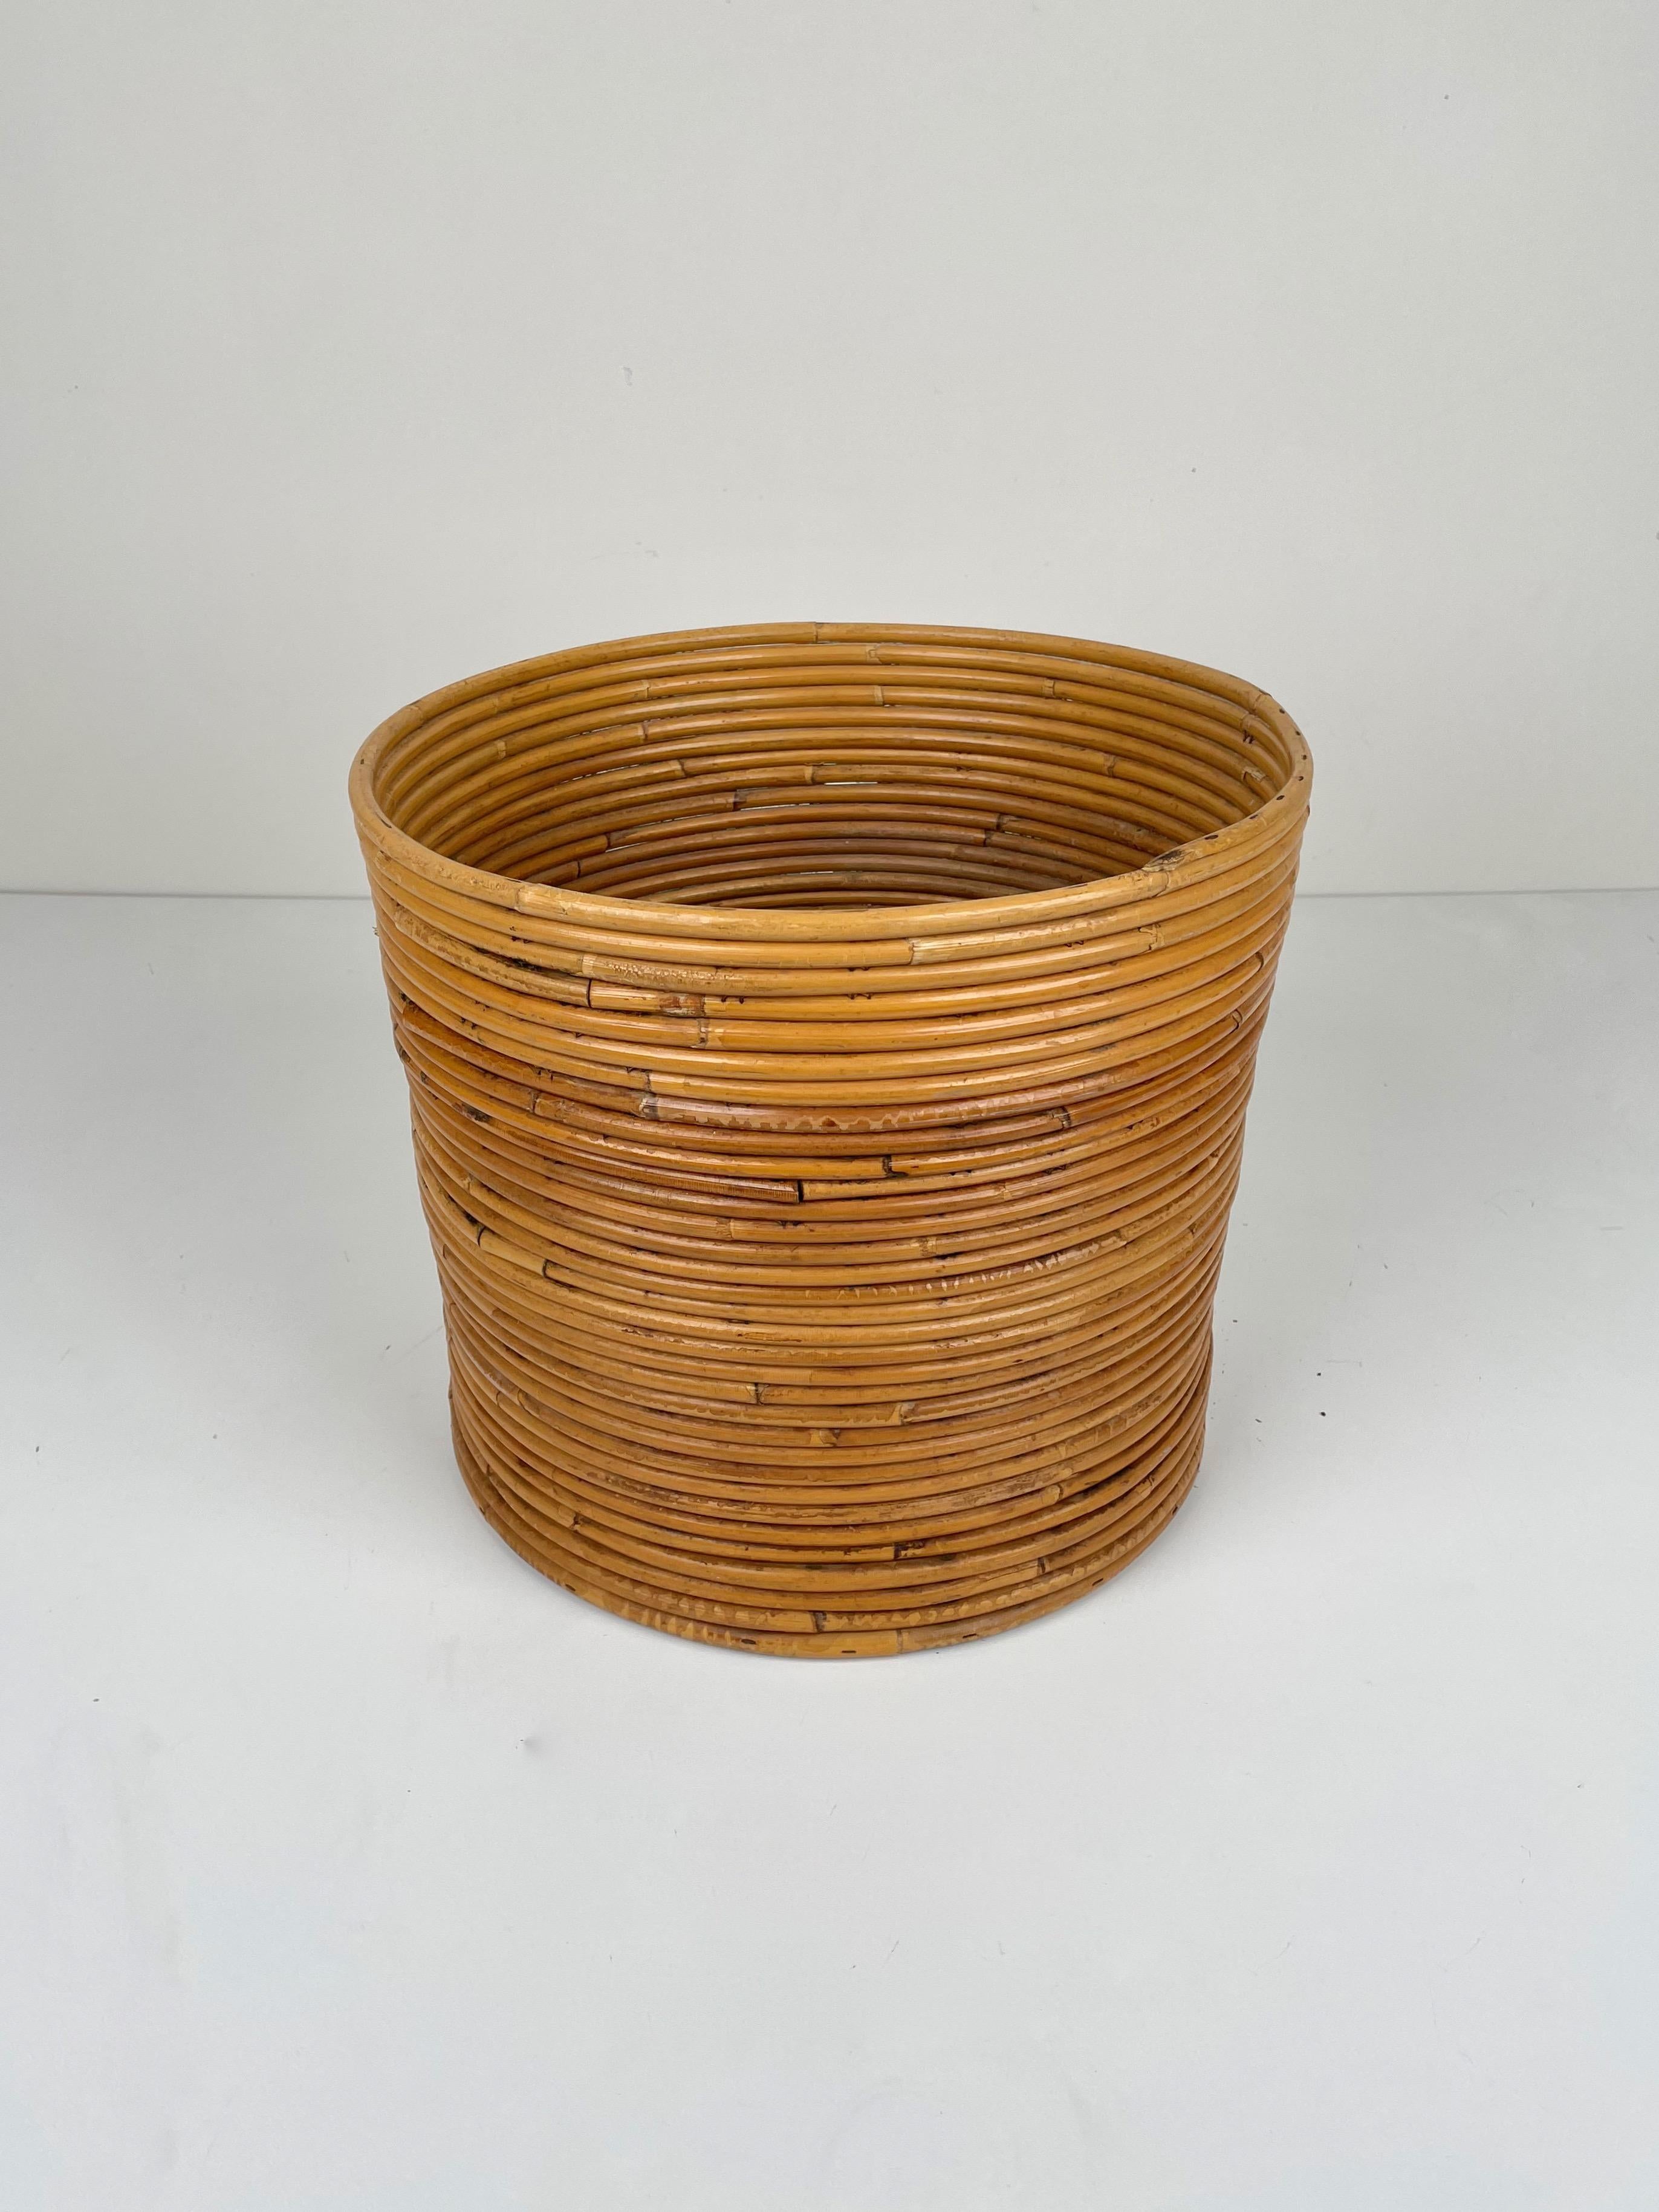 Basket / vase made all of rattan. Made in Italy in the 1960s.